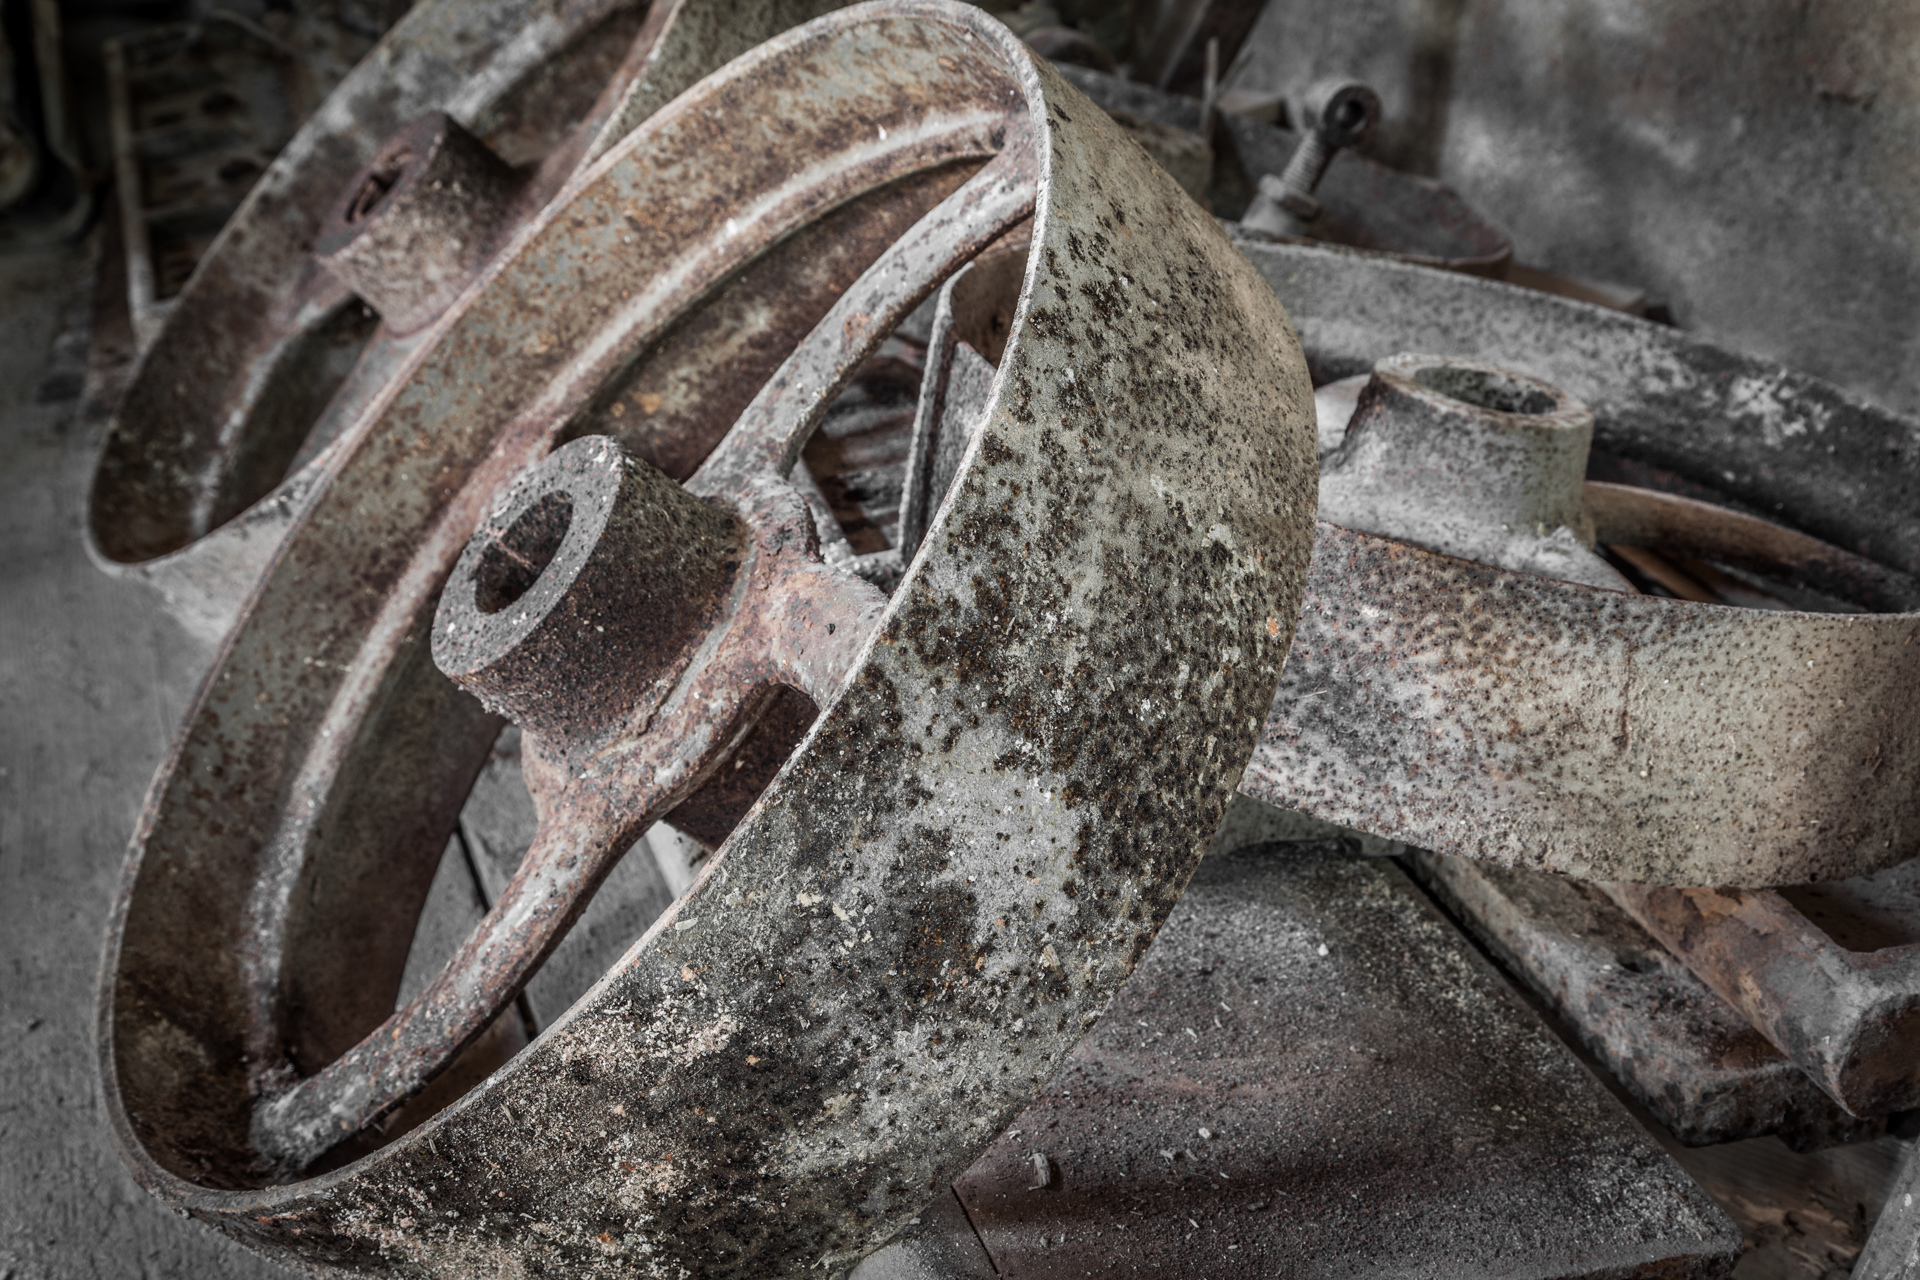 Urban Exploration - Tanning Factory - Spare Wheels